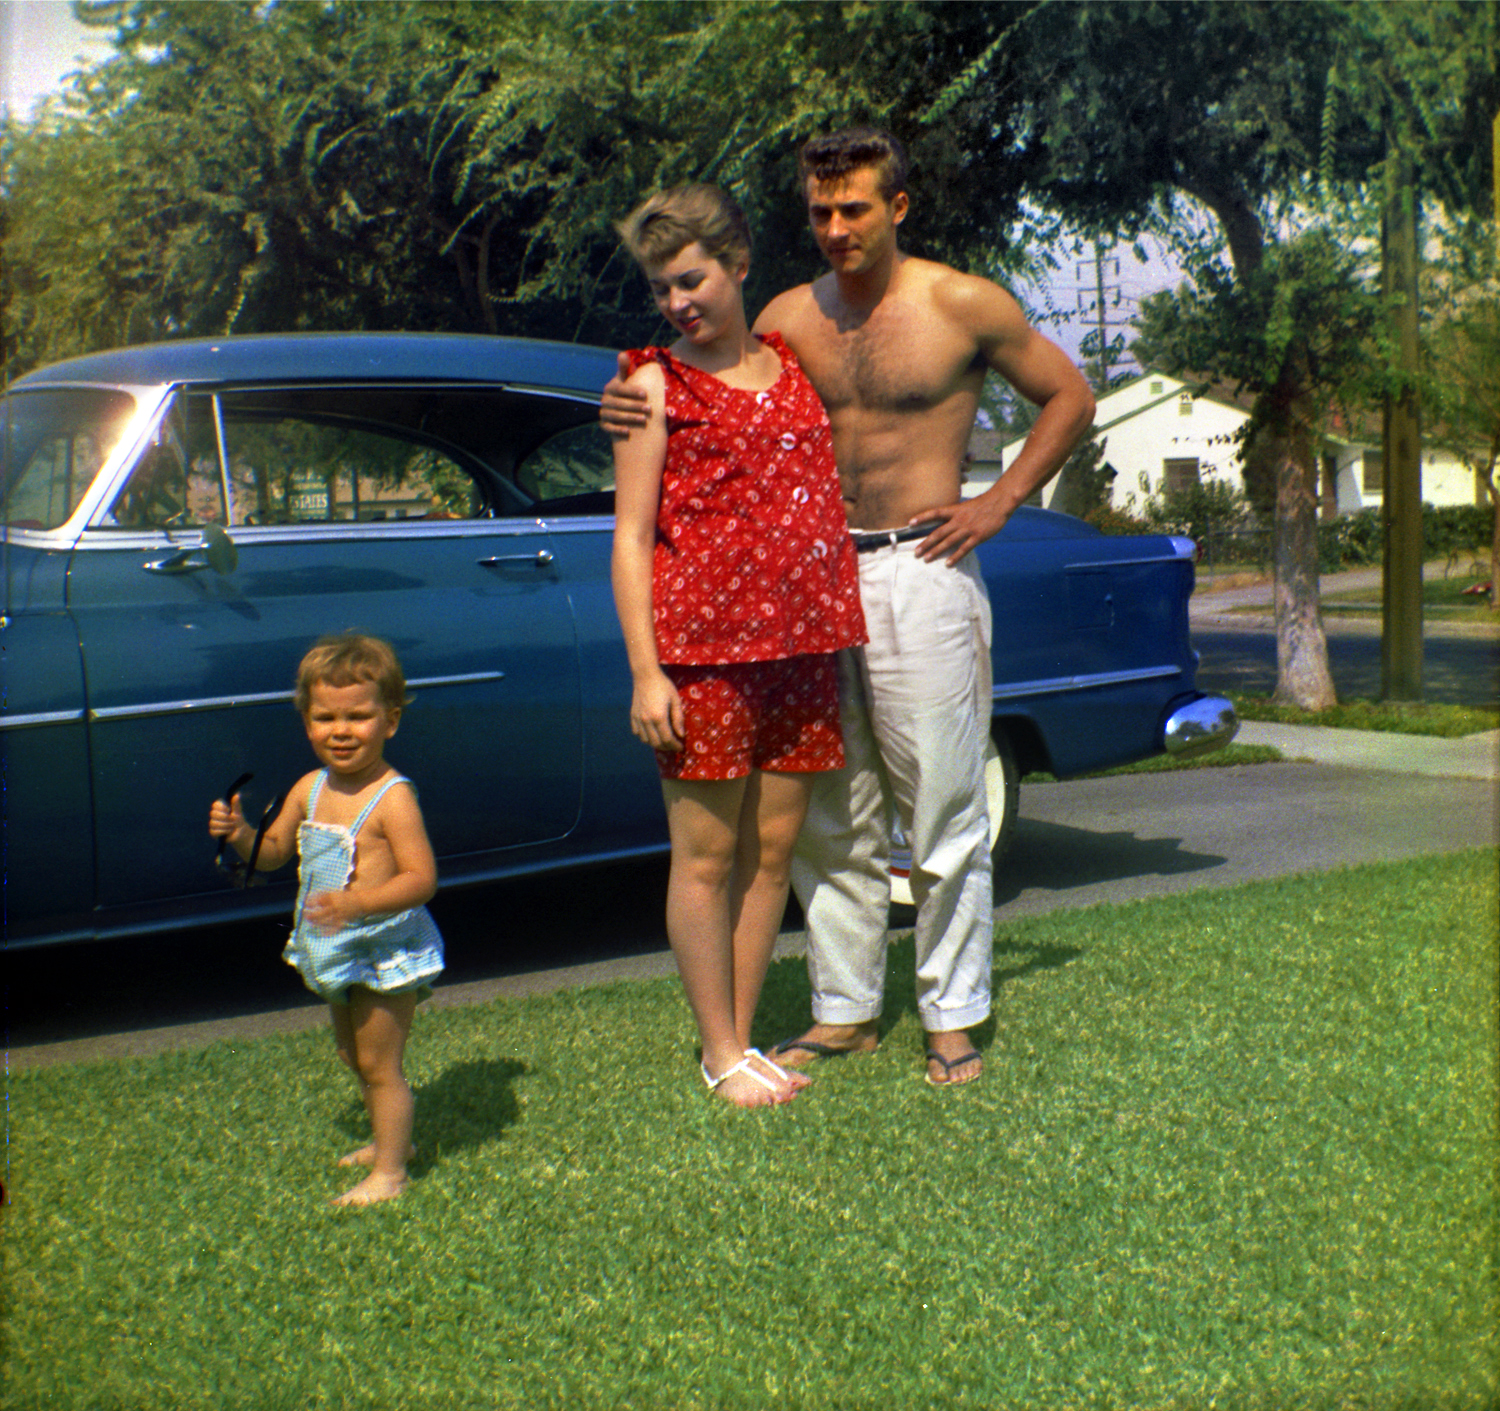 This was taken in East L.A. in 1960. That's my aunt on the left; my grandma, who is pregnant with my dad, in the middle; and Grandpa on the right. View full size.